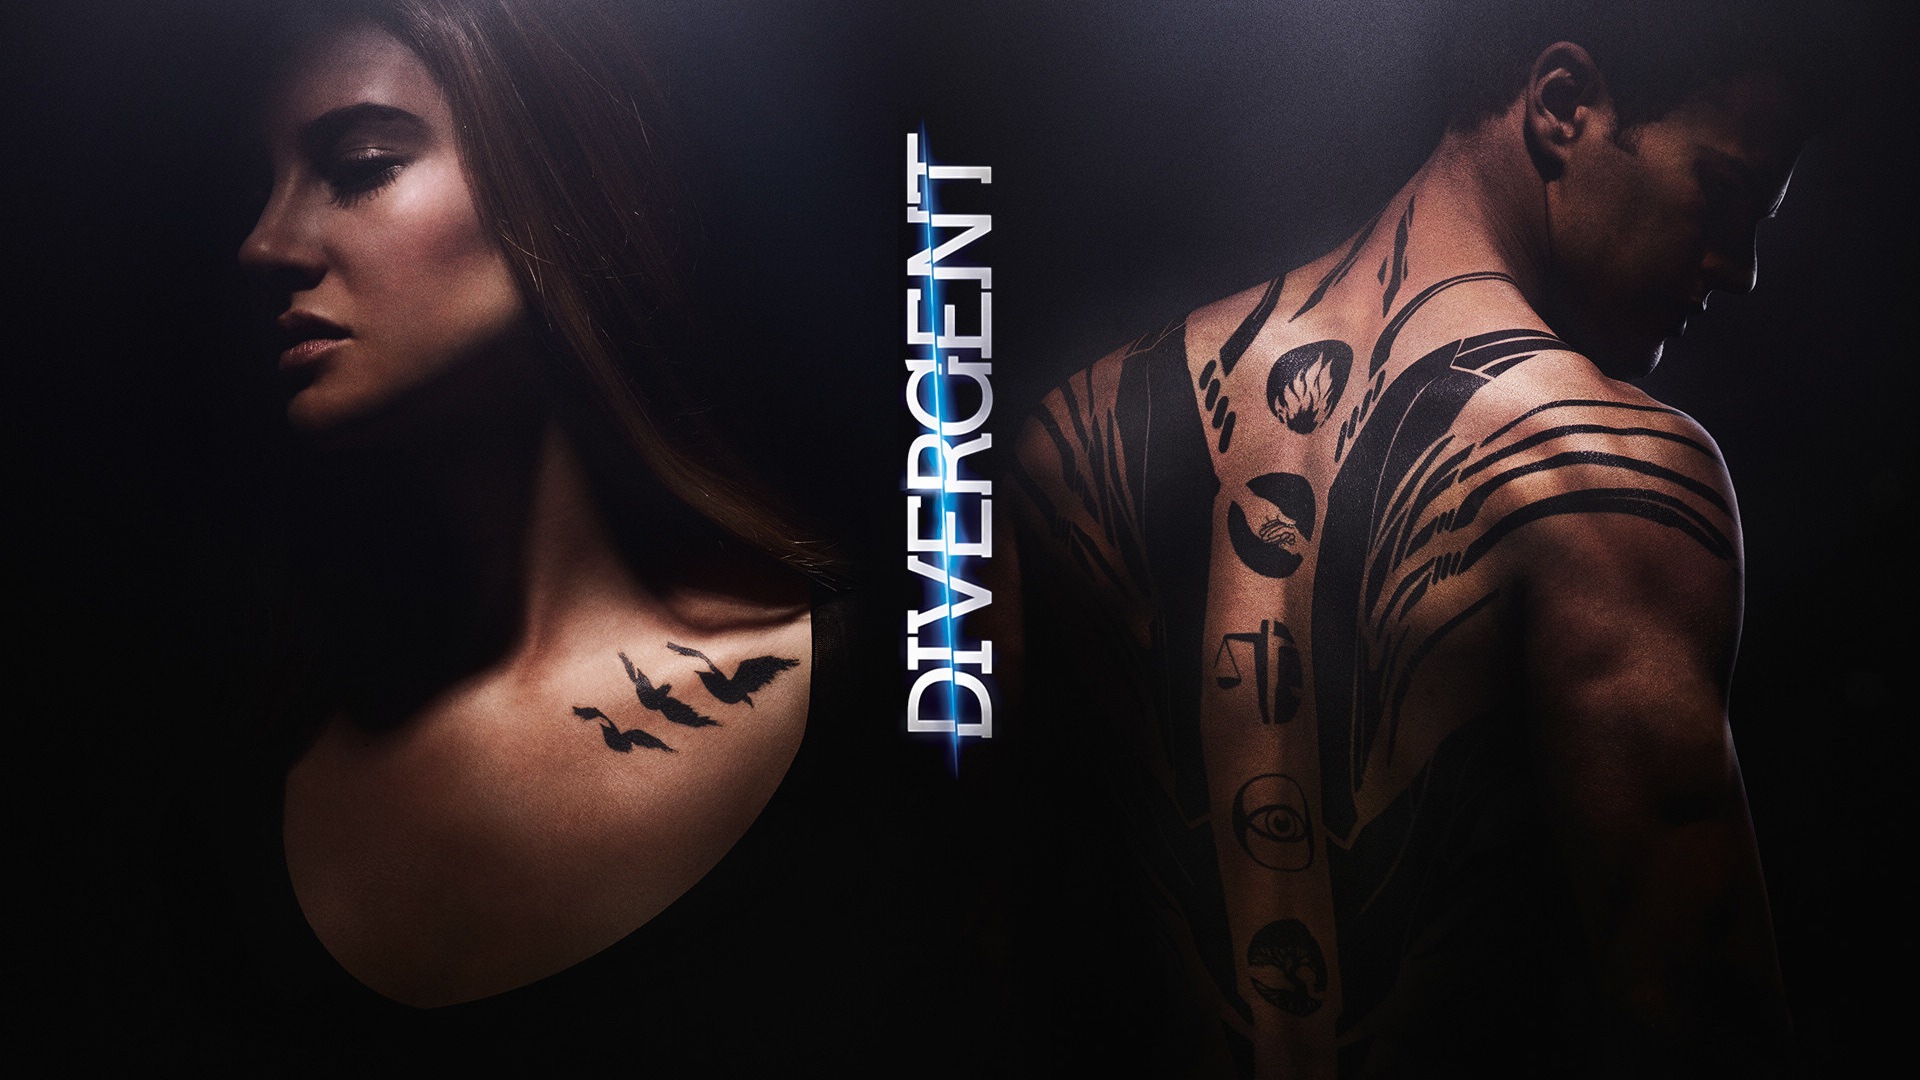 Divergent movie HD wallpapers #4 - 1920x1080